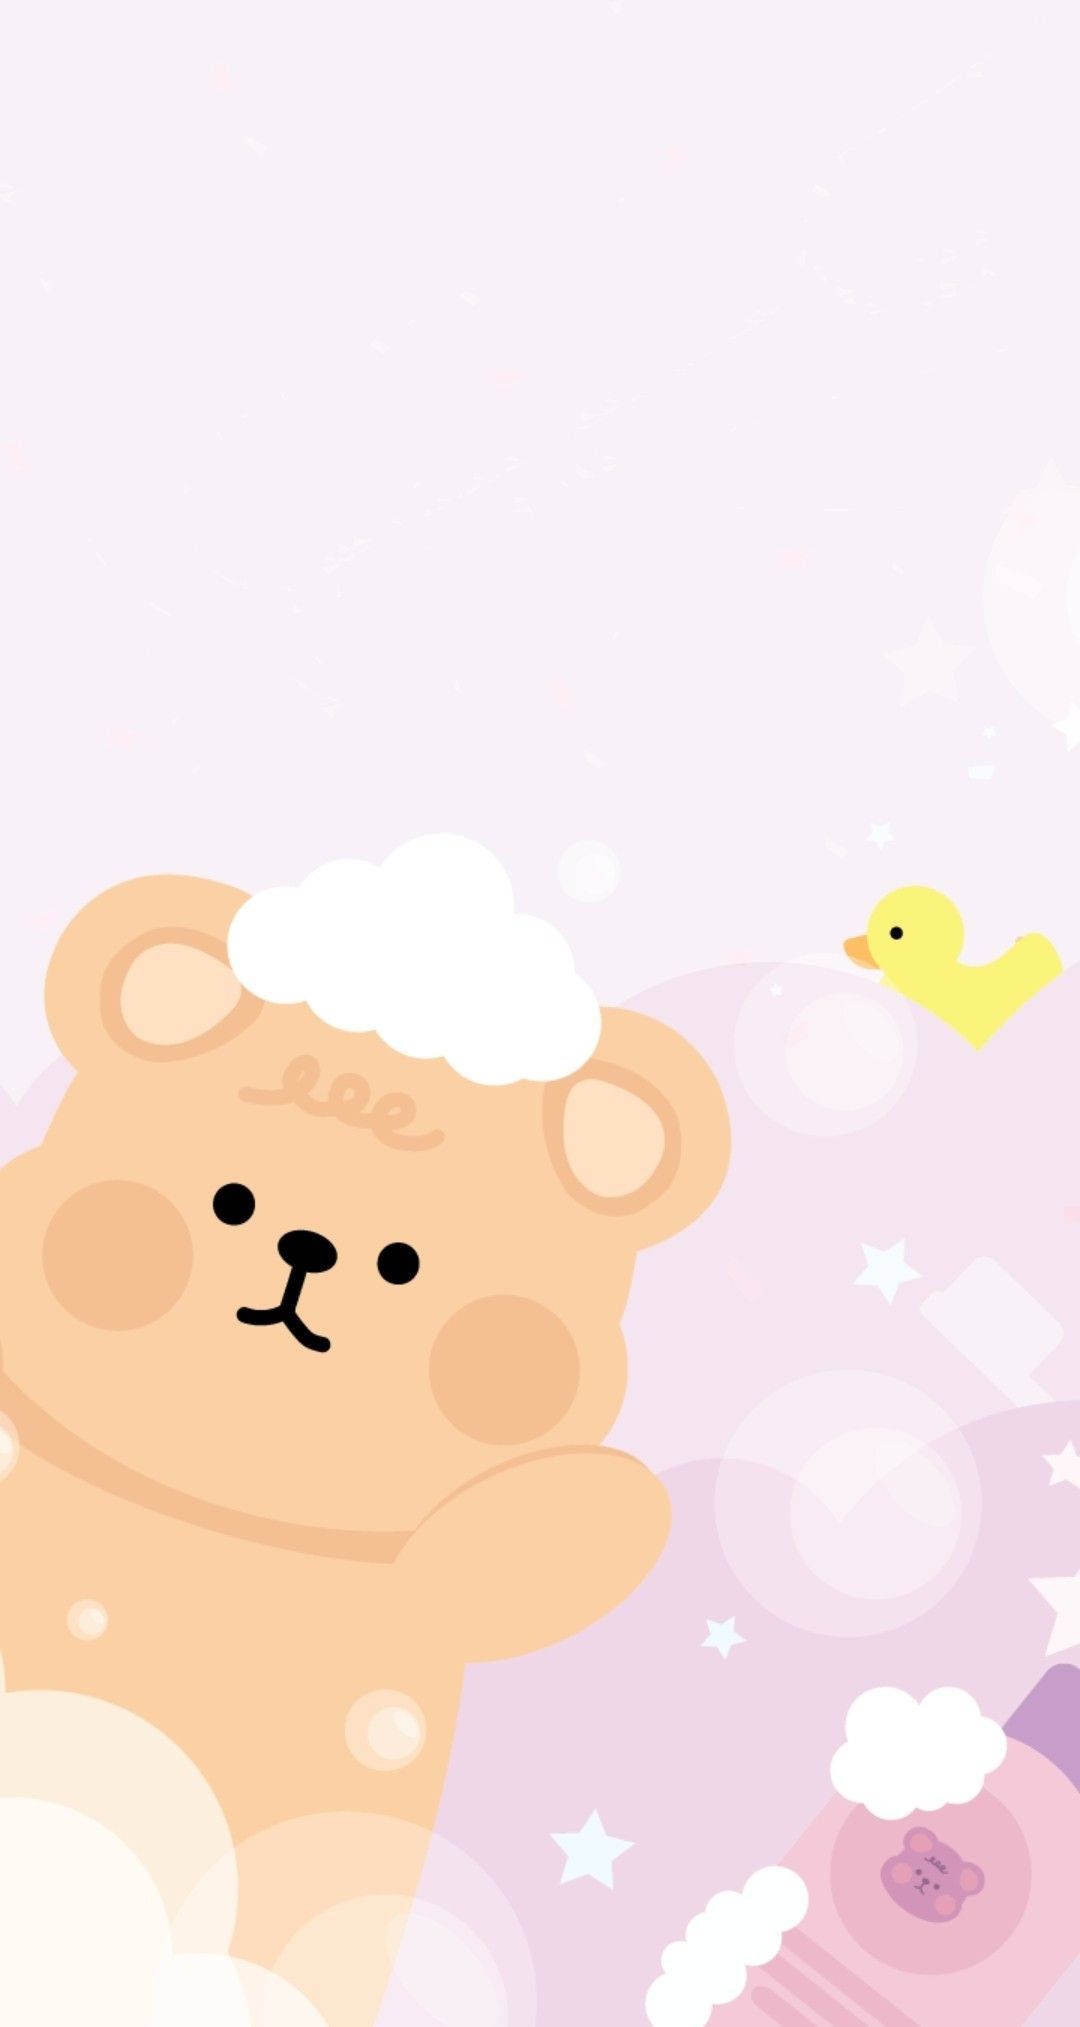 A cute bear with soap bubbles in the background - Duck